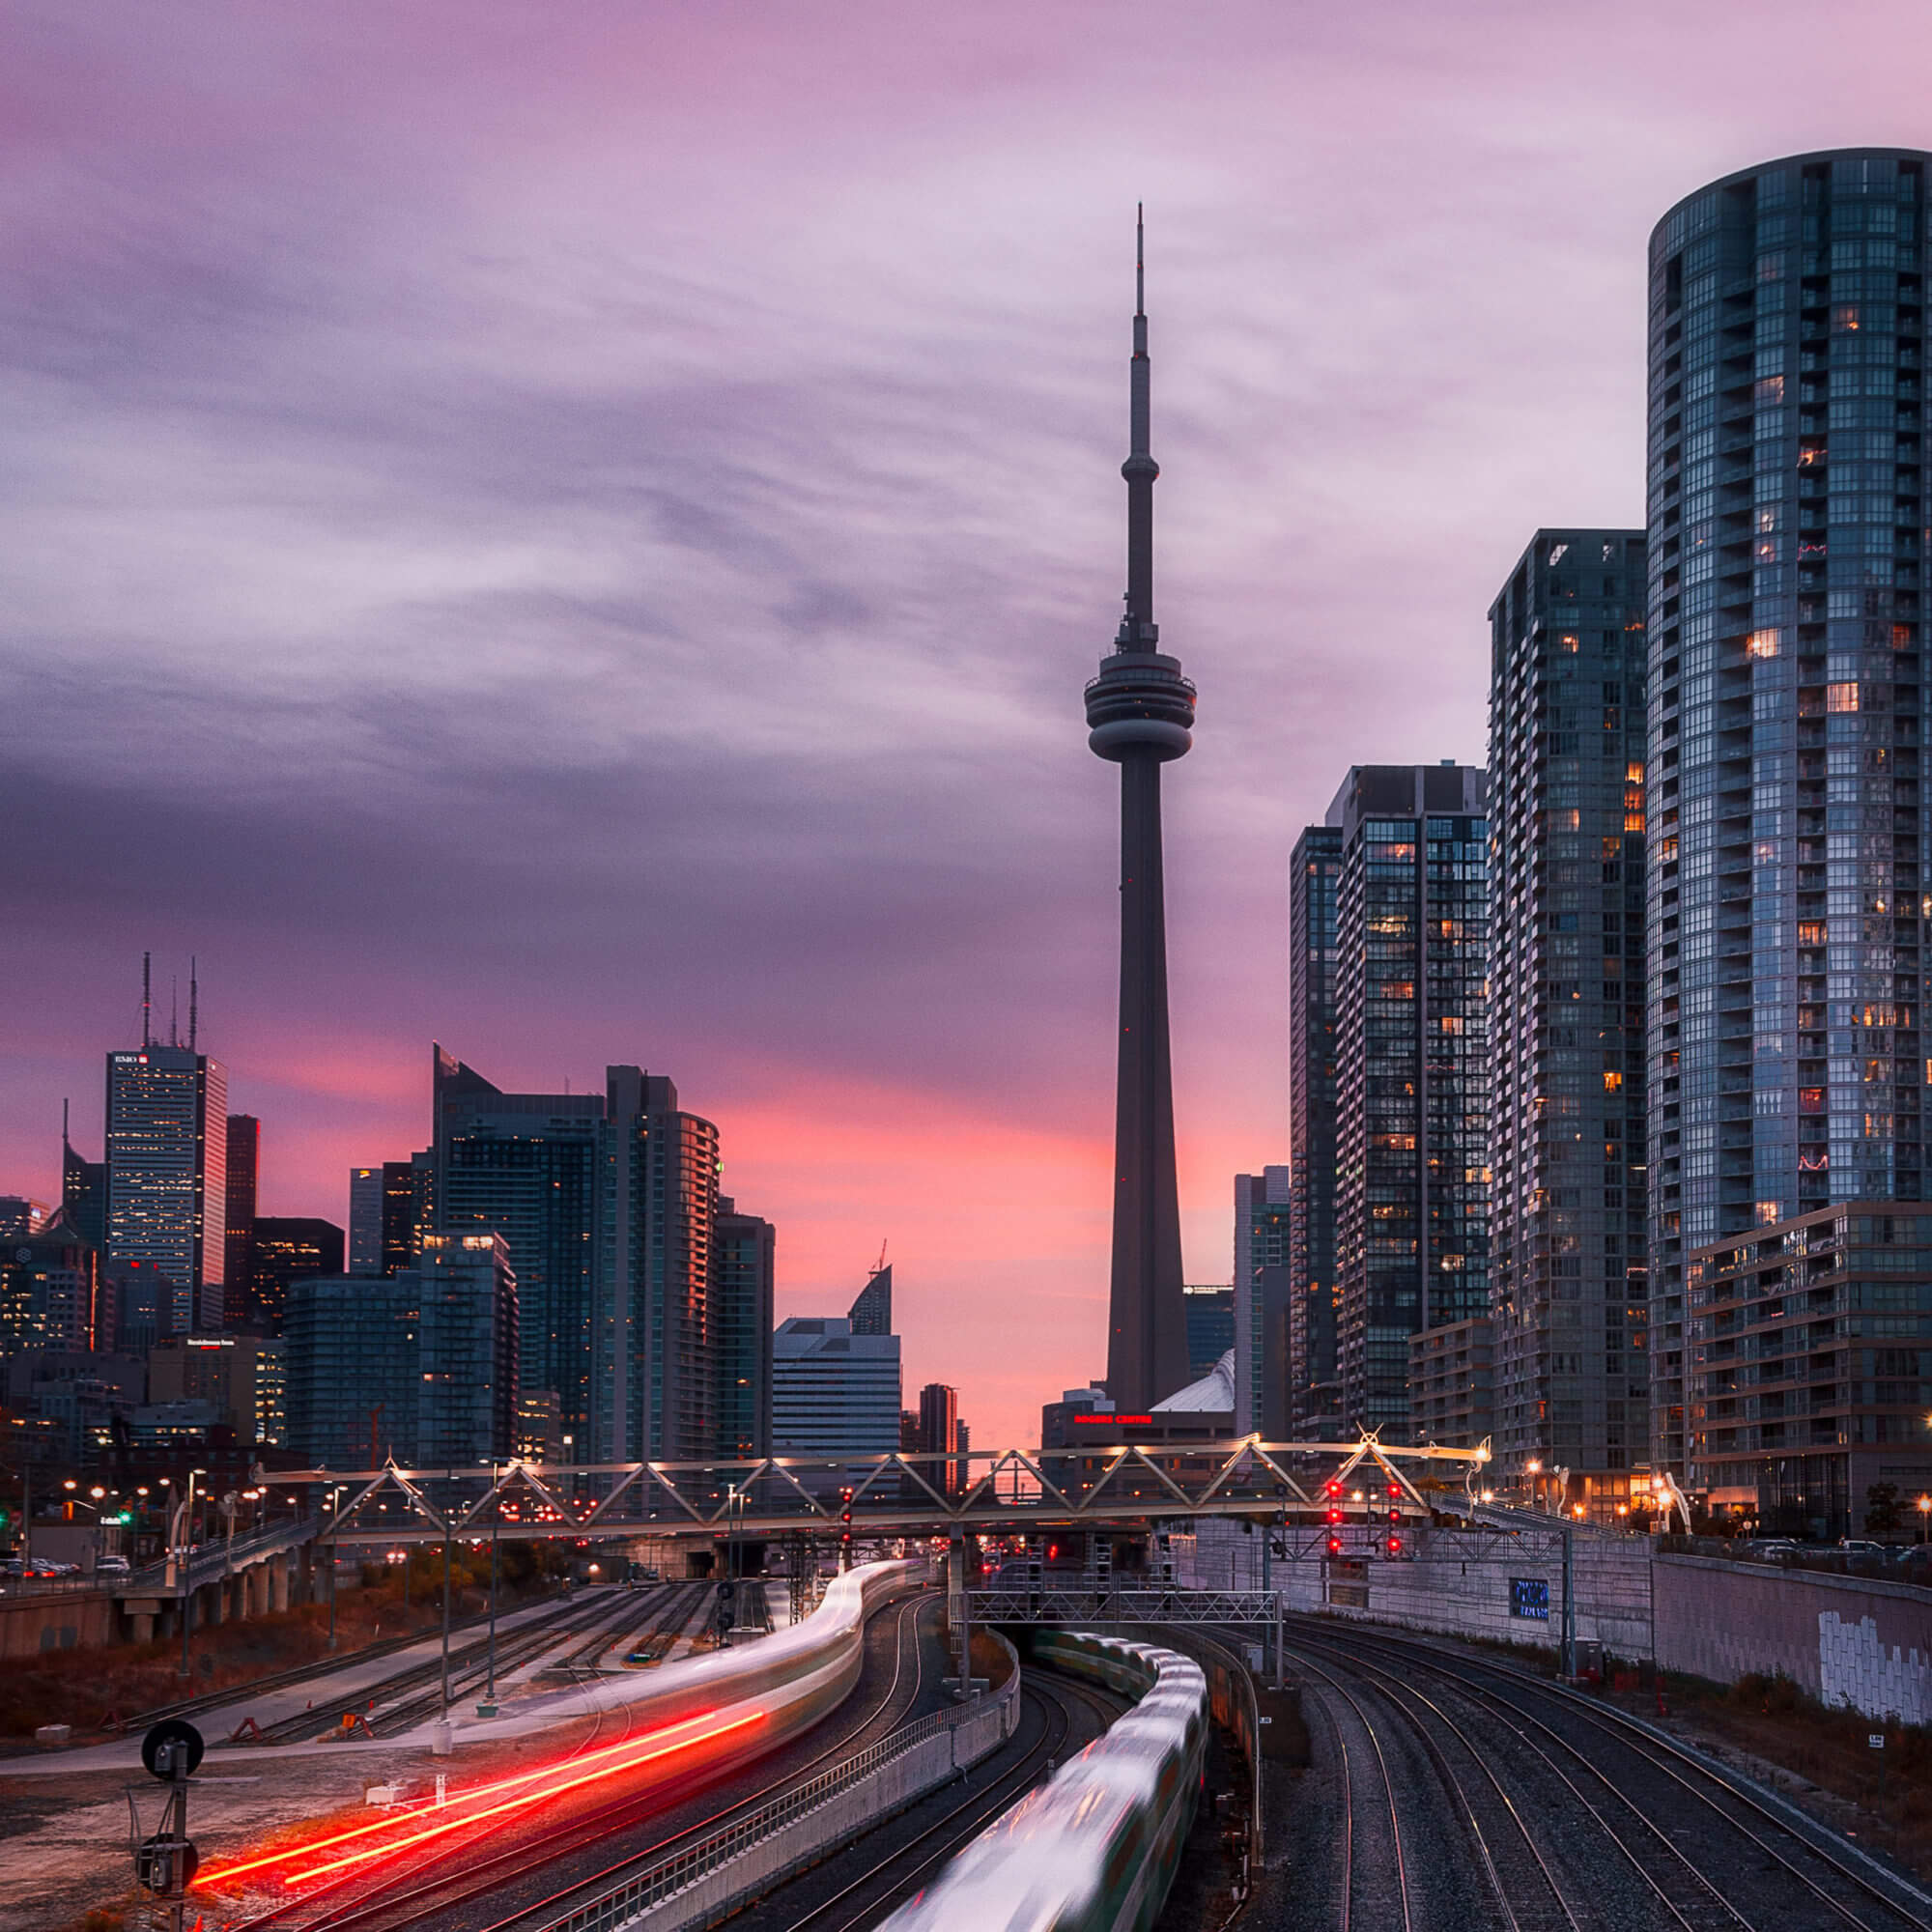 Sunset in downtown Toronto including the CN tower, tall glass buildings and the GO train